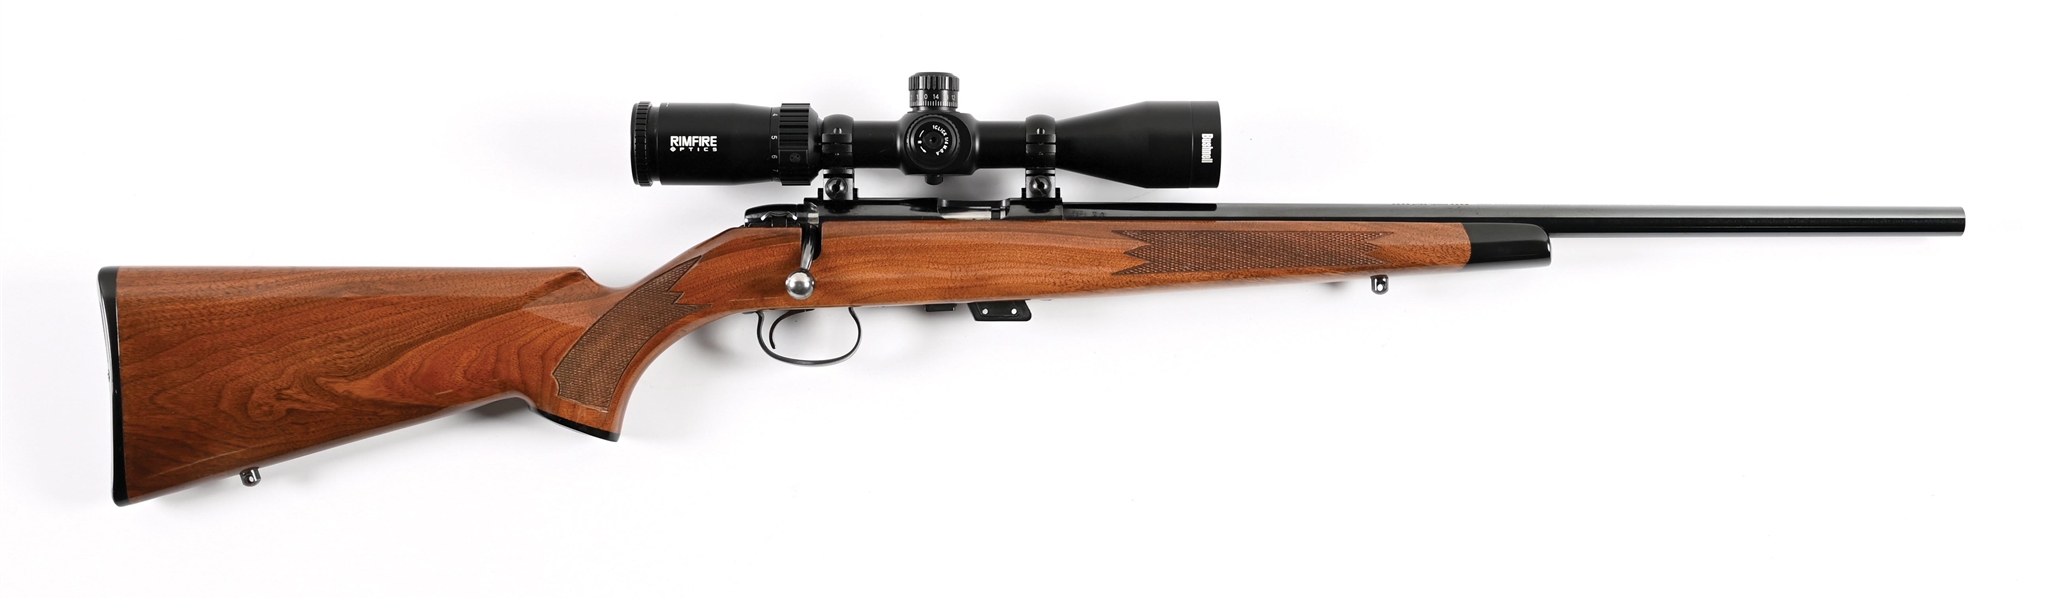 (M) REMINGTON MODEL 541-T BOLT ACTION RIFLE WITH SCOPE AND BOX.